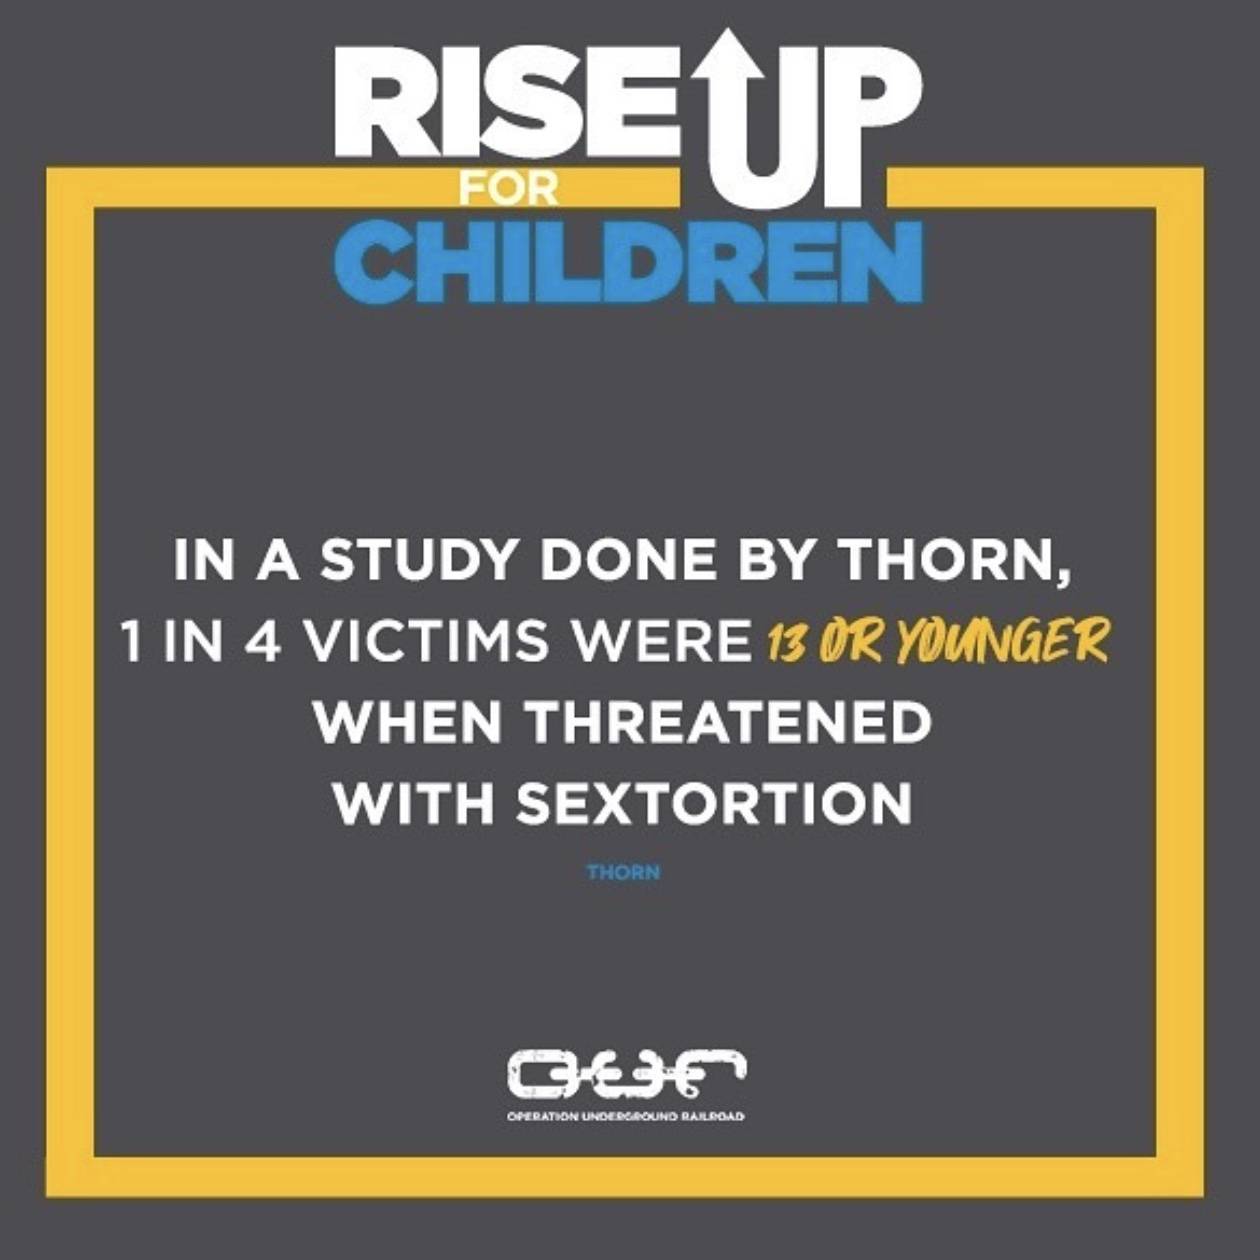 Rise up! Protect children from child sexual abuse material. 